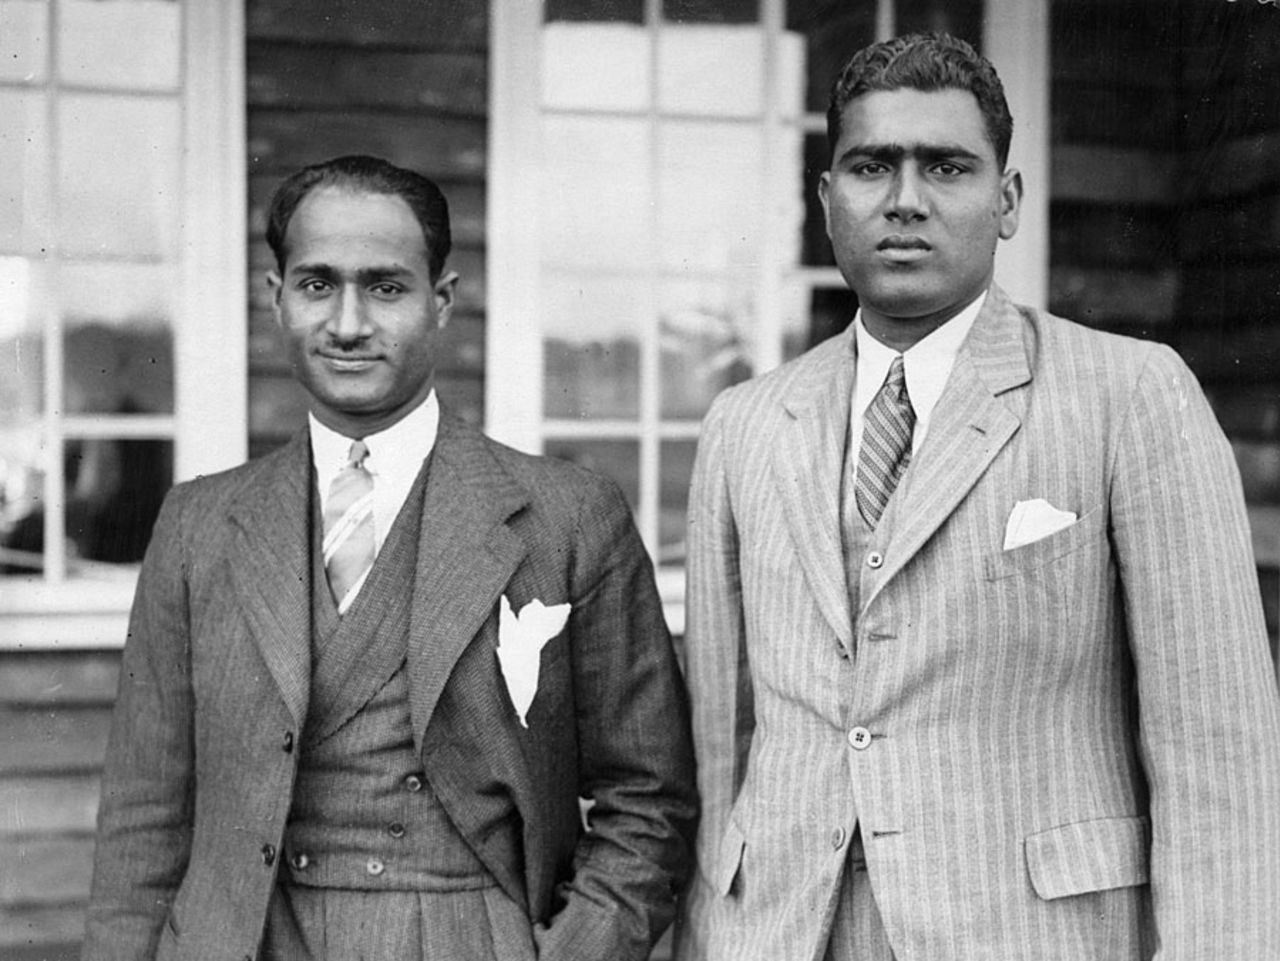 Nazir Ali and Mohammad Nissar on their tour of England, April 29, 1932